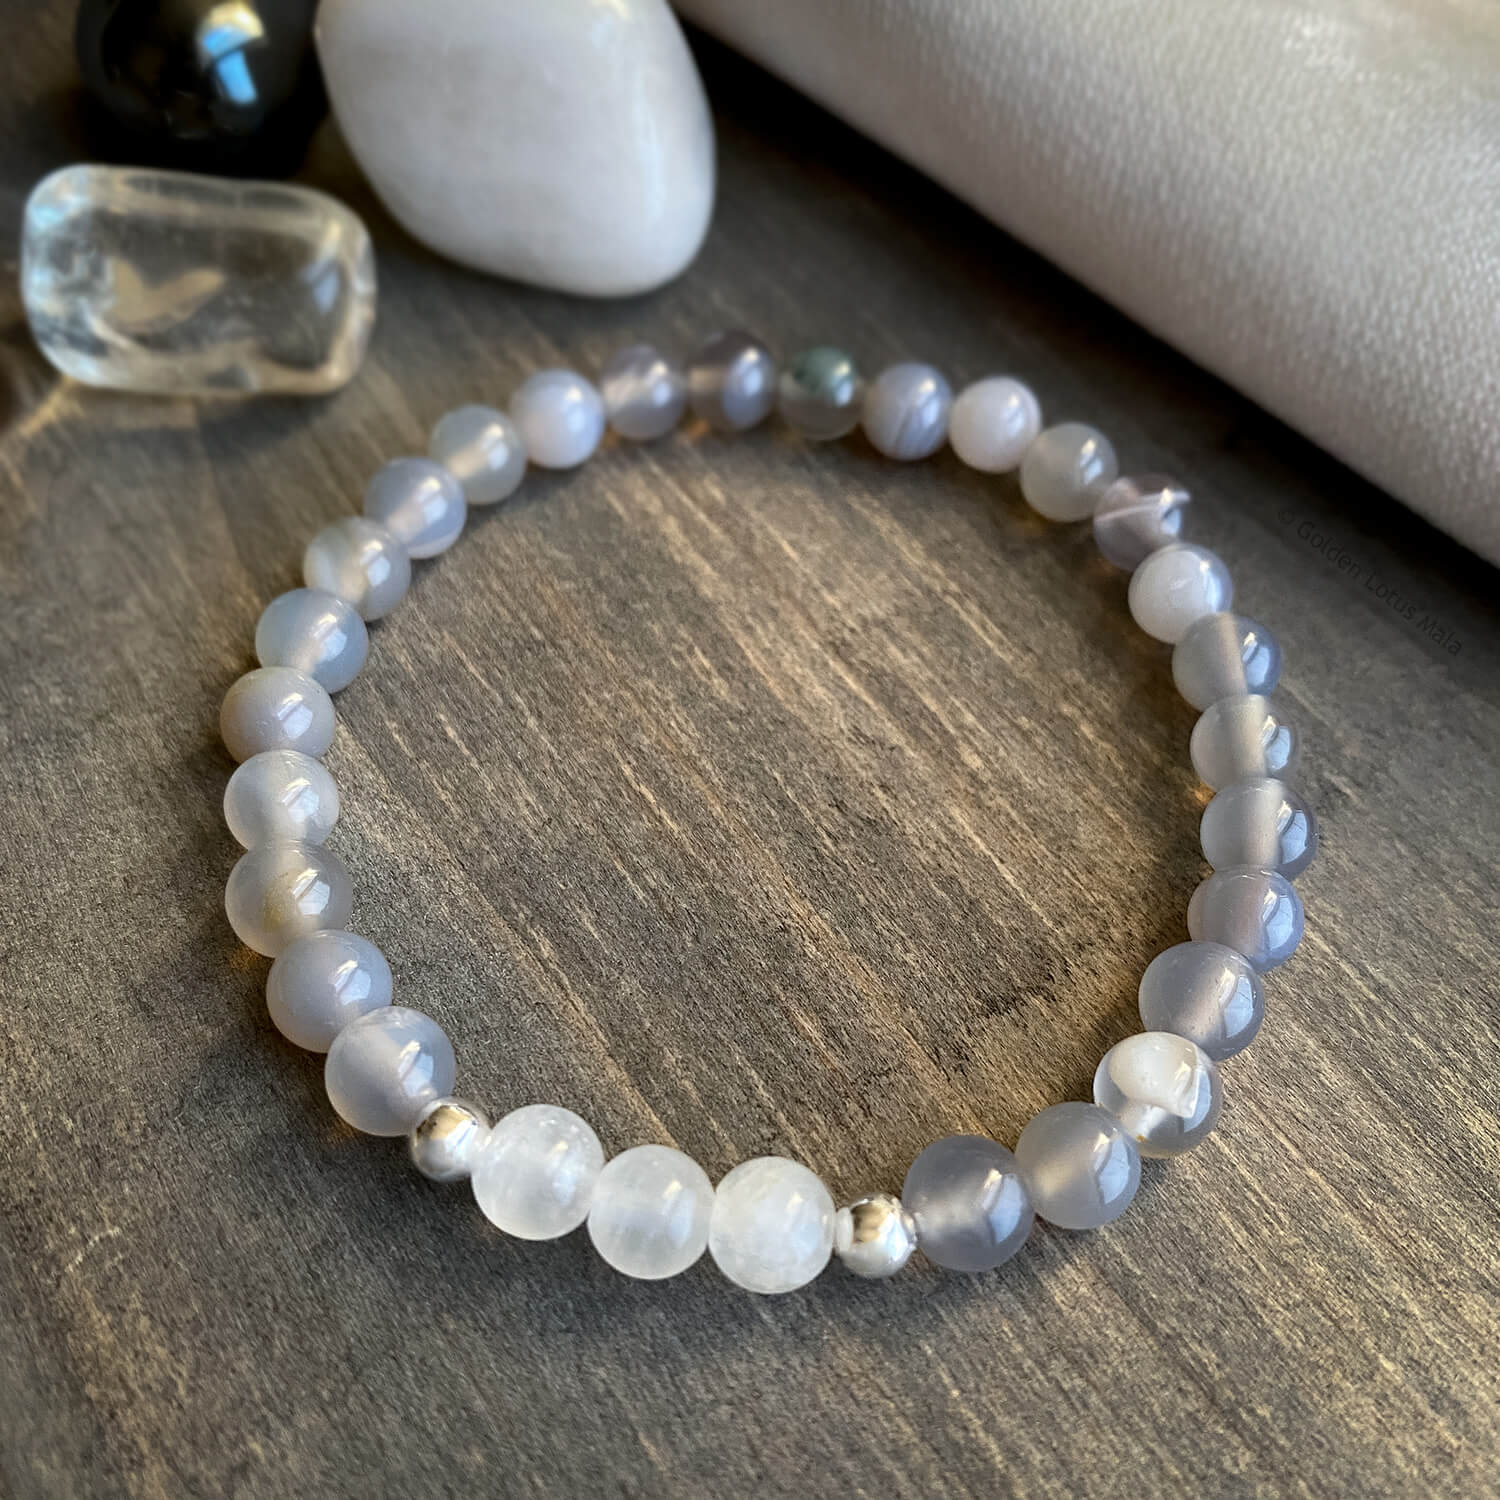 Agate Bracelet with Selenite, Harmony and Grounding